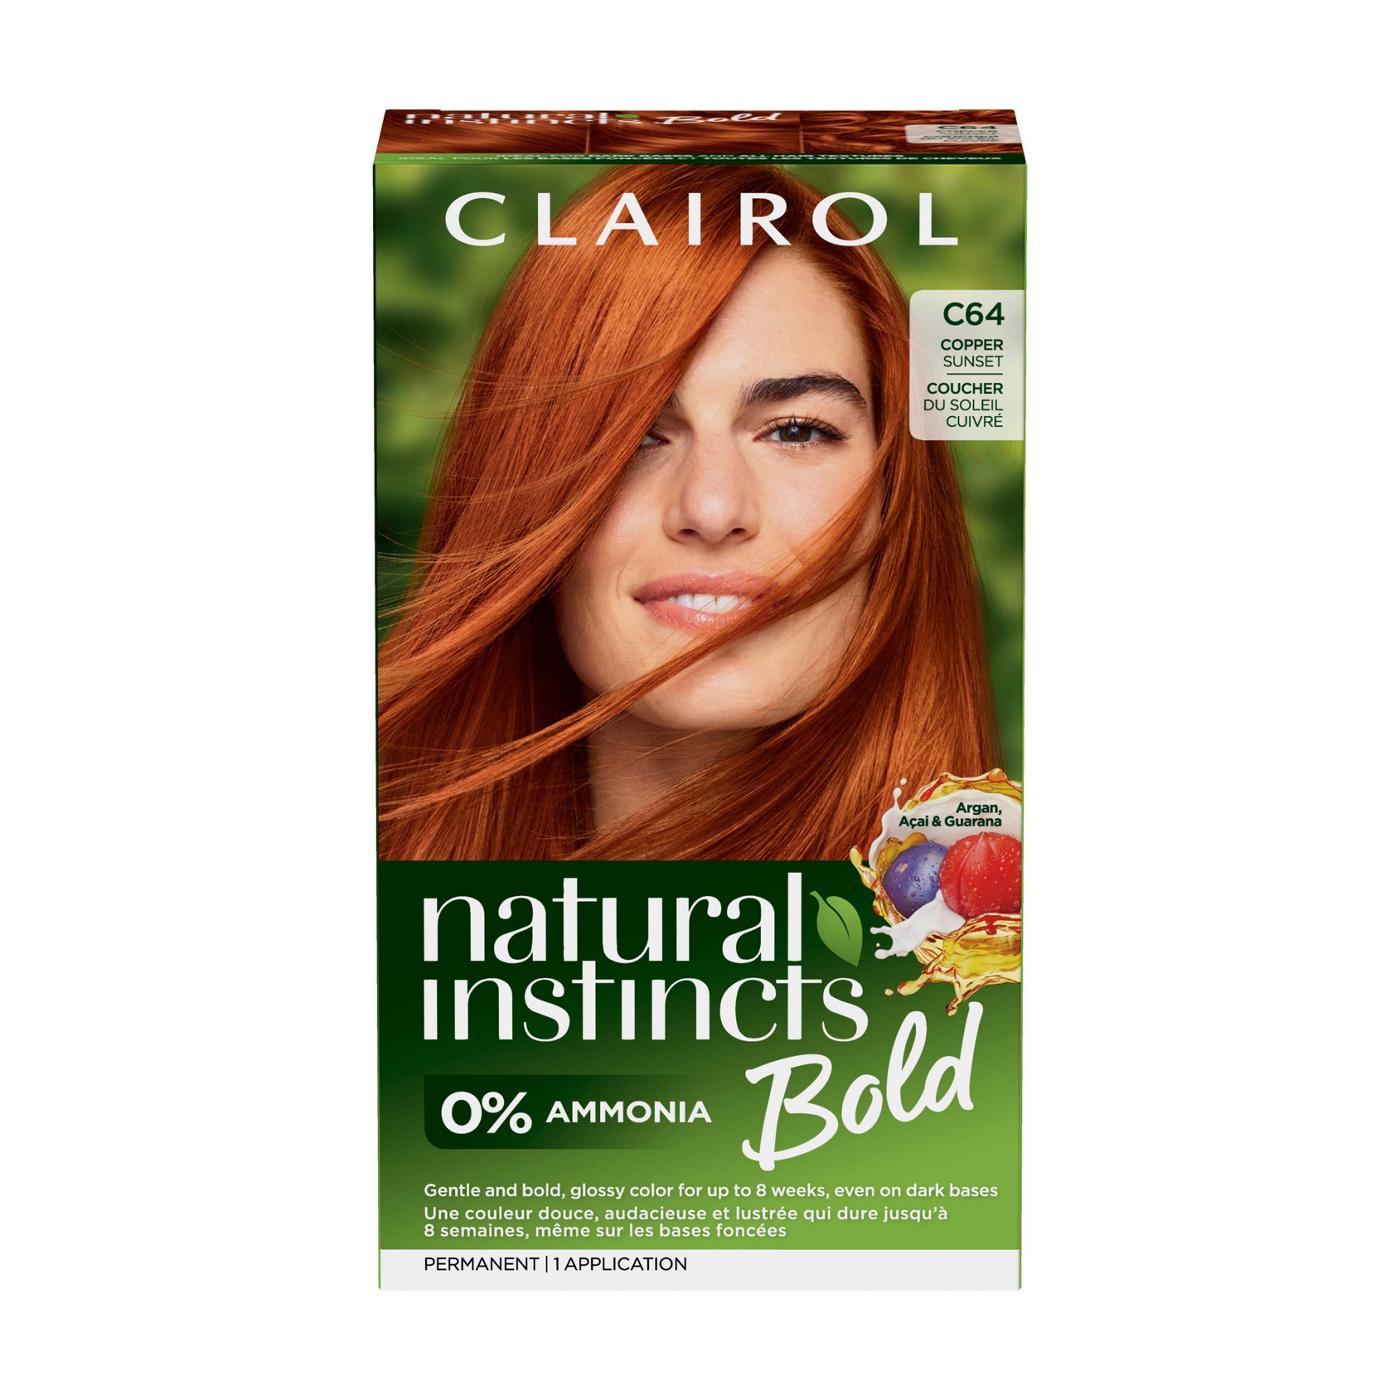 Clairol Natural Instincts Bold Permanent Hair Color - C64 Copper Sunset ; image 1 of 6